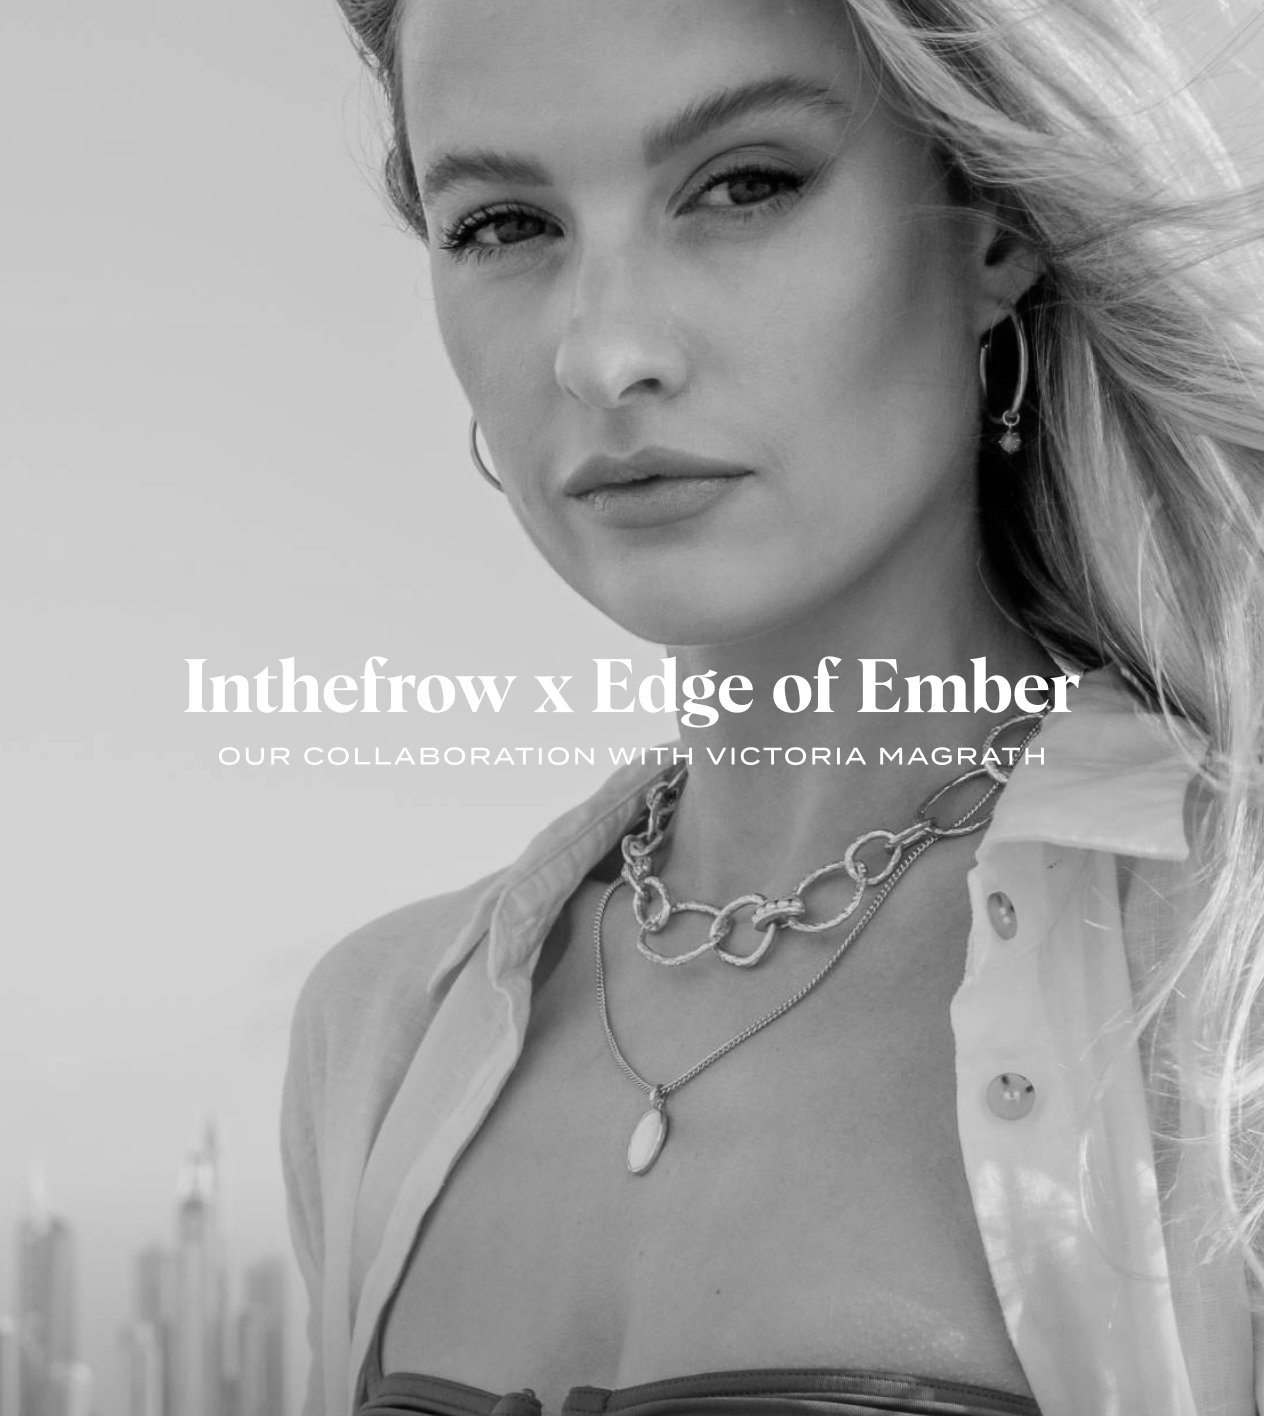 Edge of Ember Ltd: VICTORIA'S SUMMER PARADISE | Milled